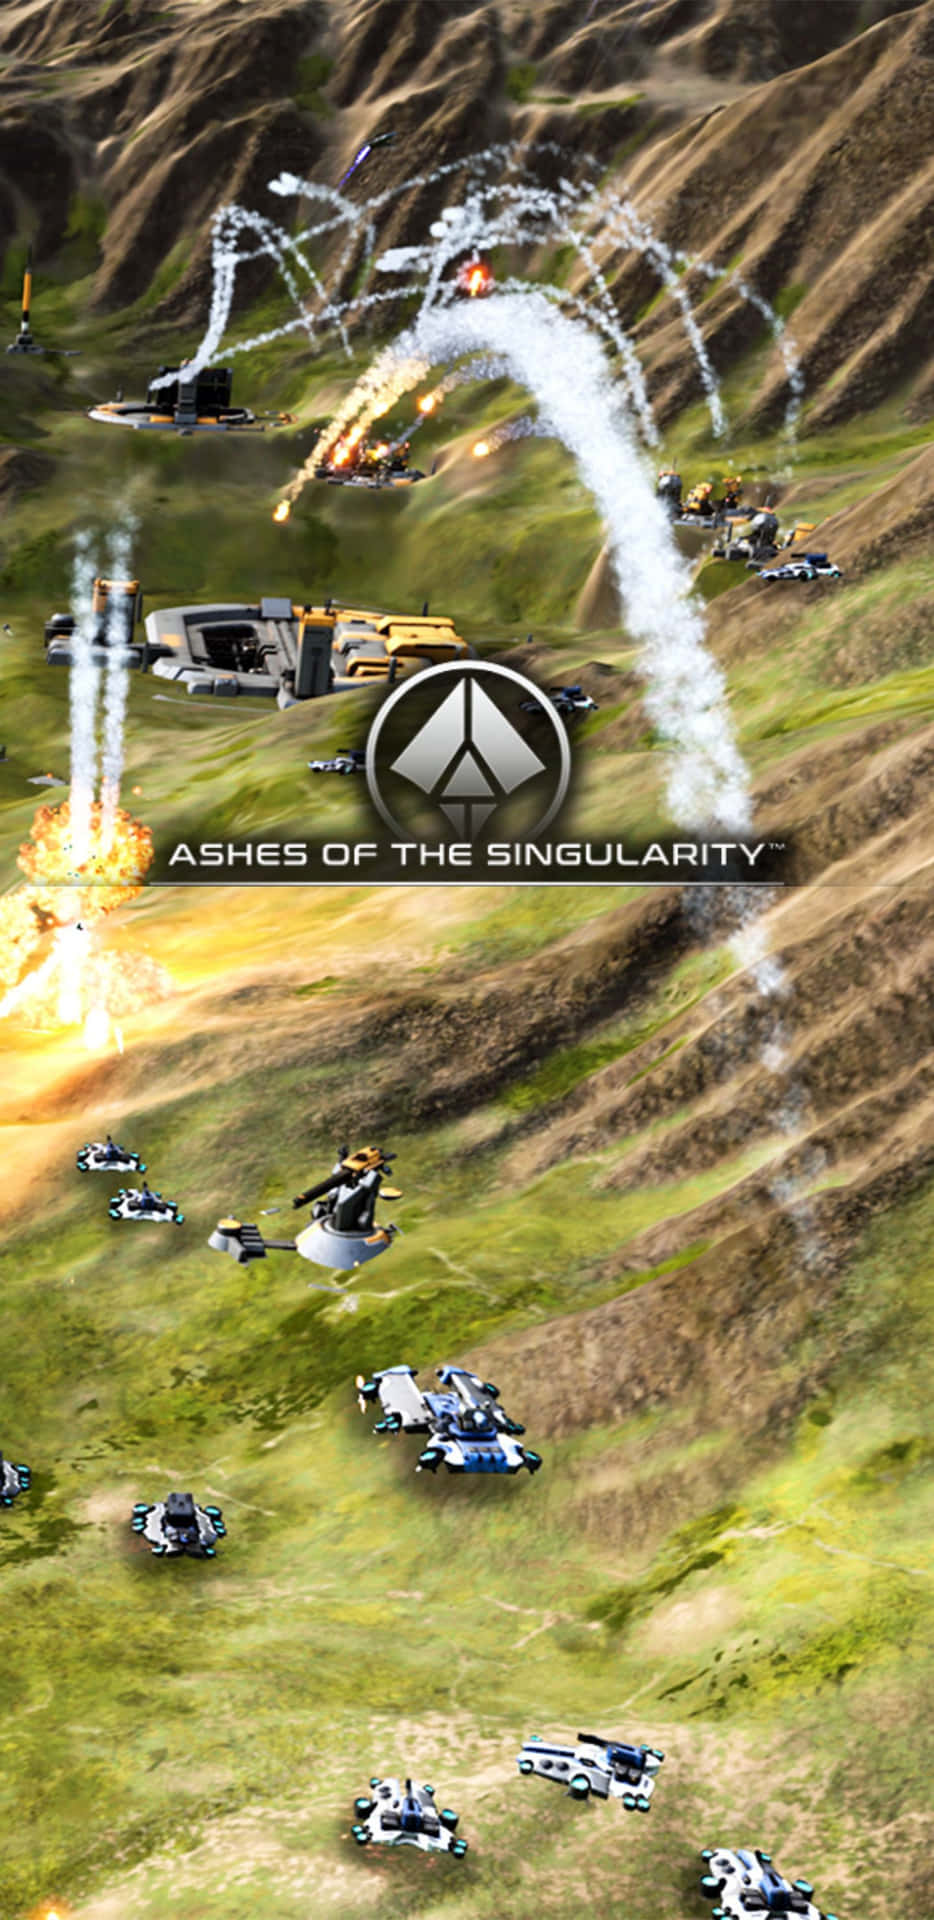 Experience The Finest Gaming With Theixel 3XL and Ashes of the Singularity